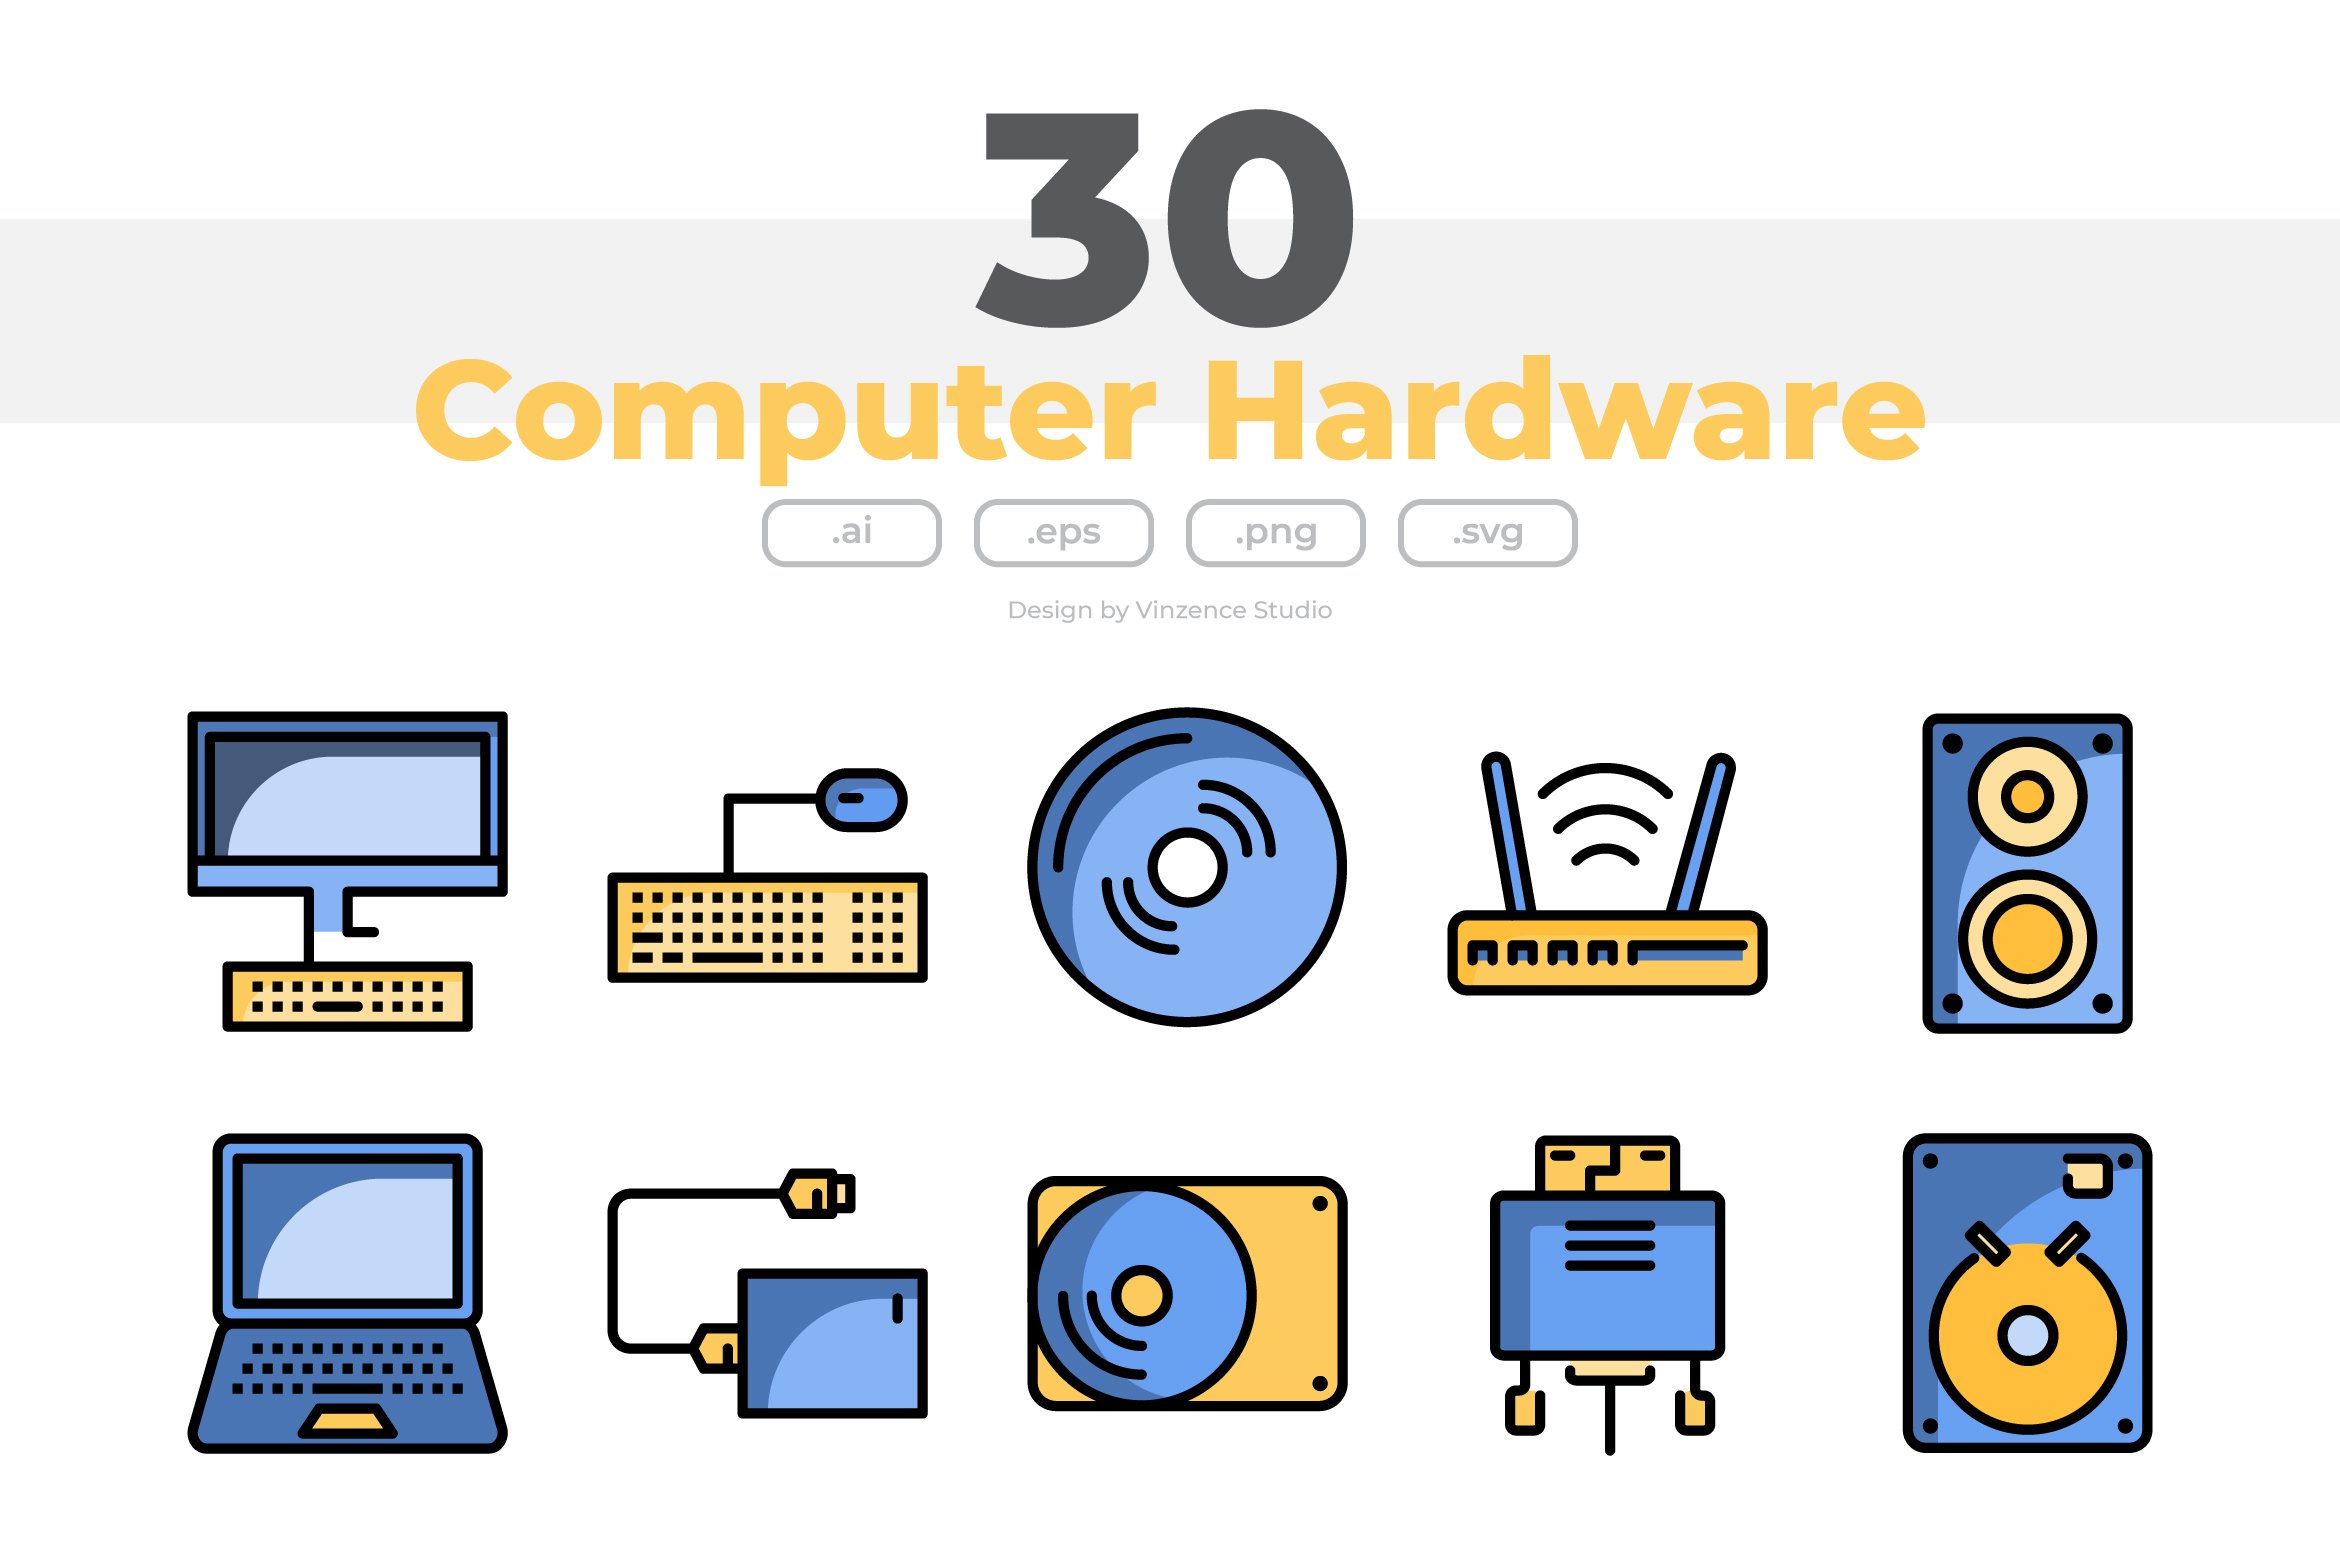 30 Computer Hardware Icon Sets cover image.